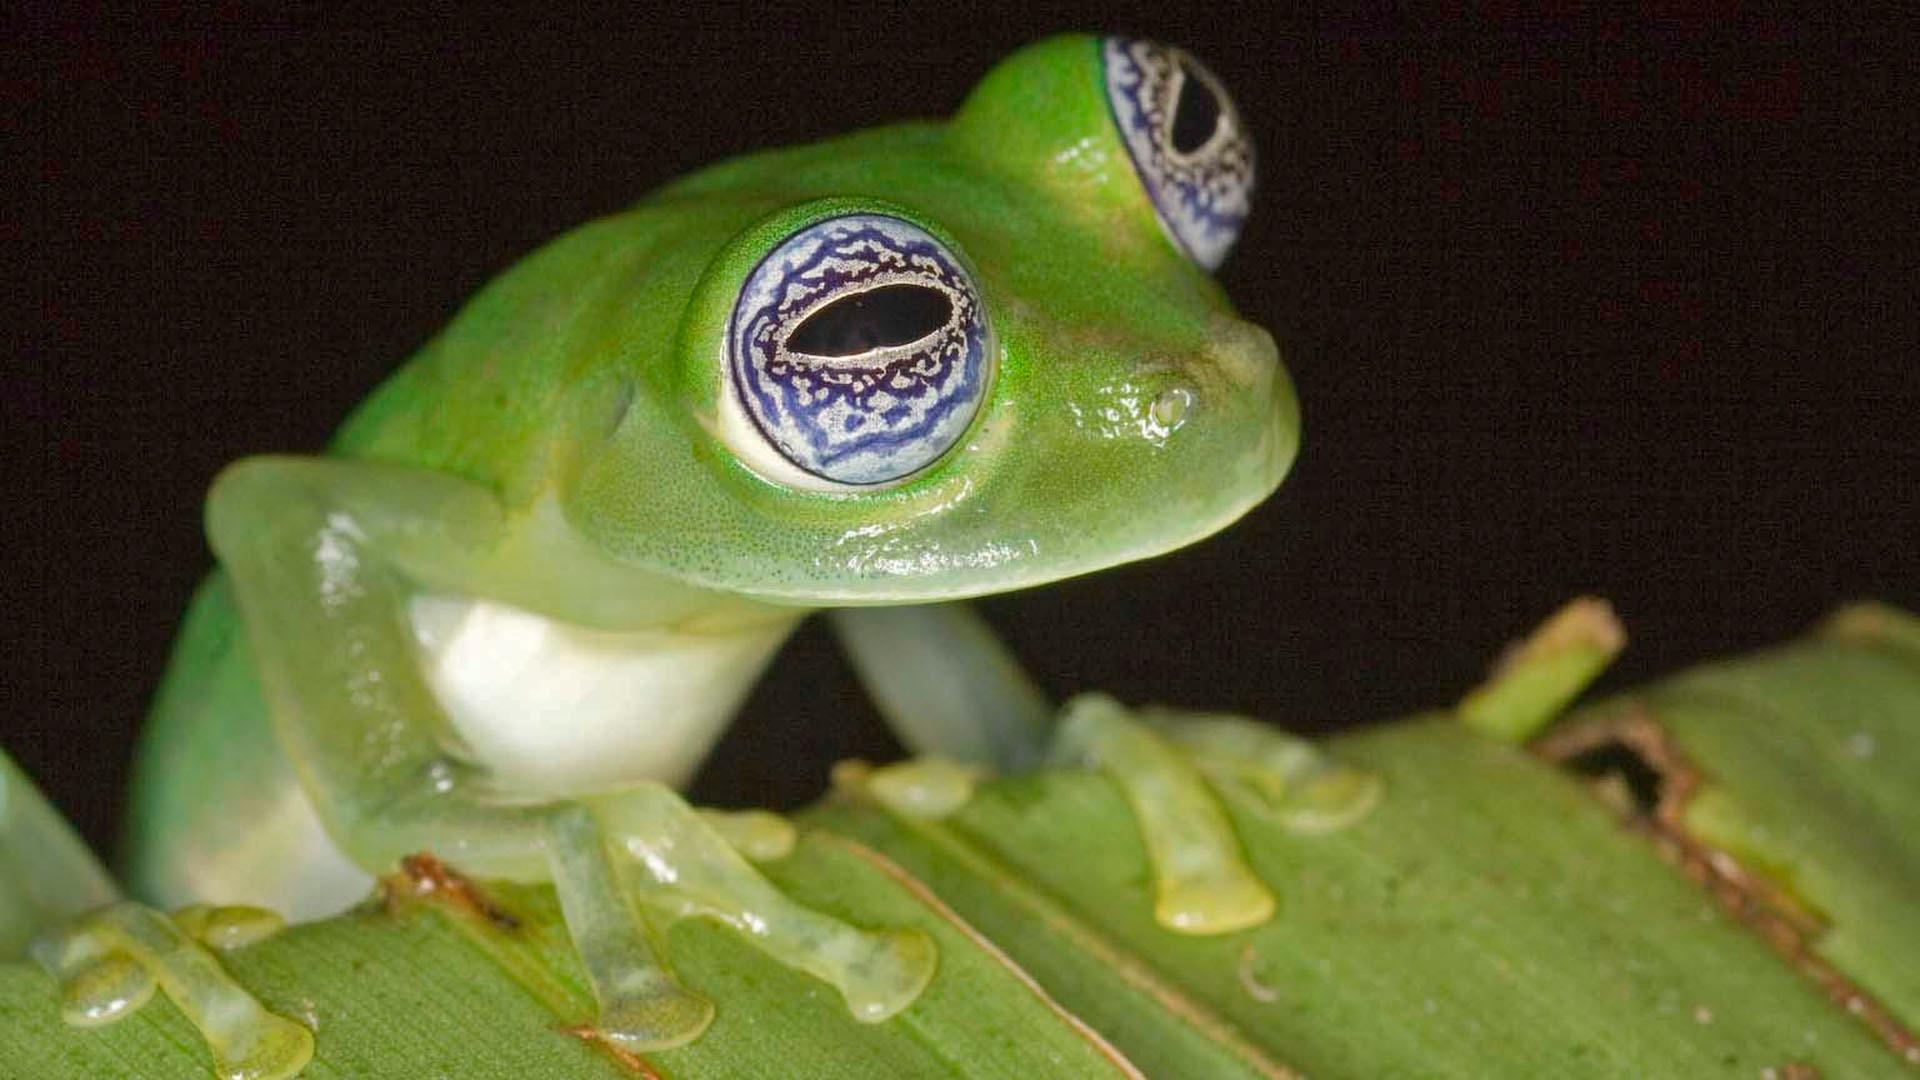 New Tiny Green Frog Is First Spotted in Costa Rica